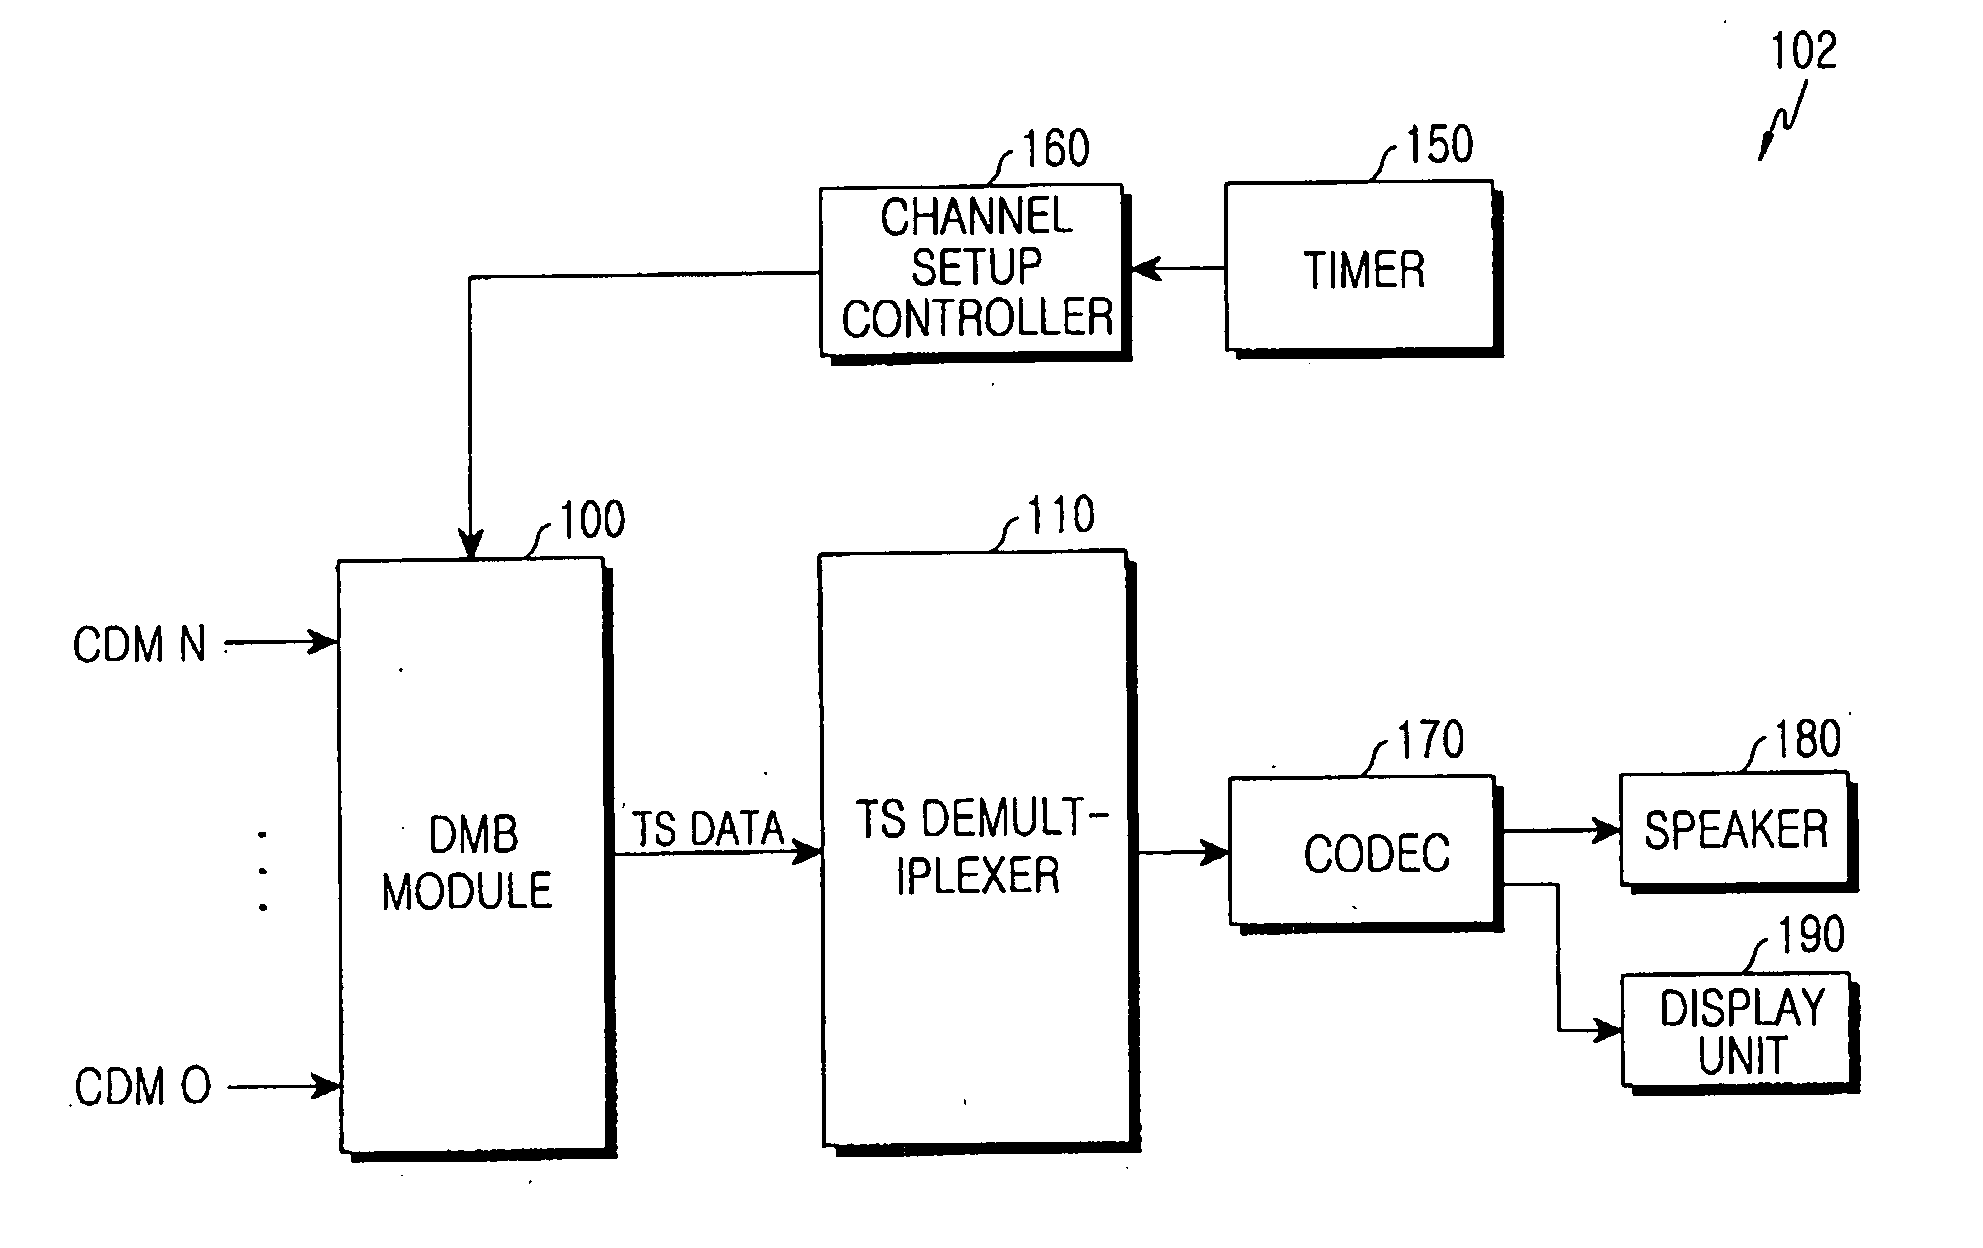 Apparatus for receiving digital multimedia broadcasting channels